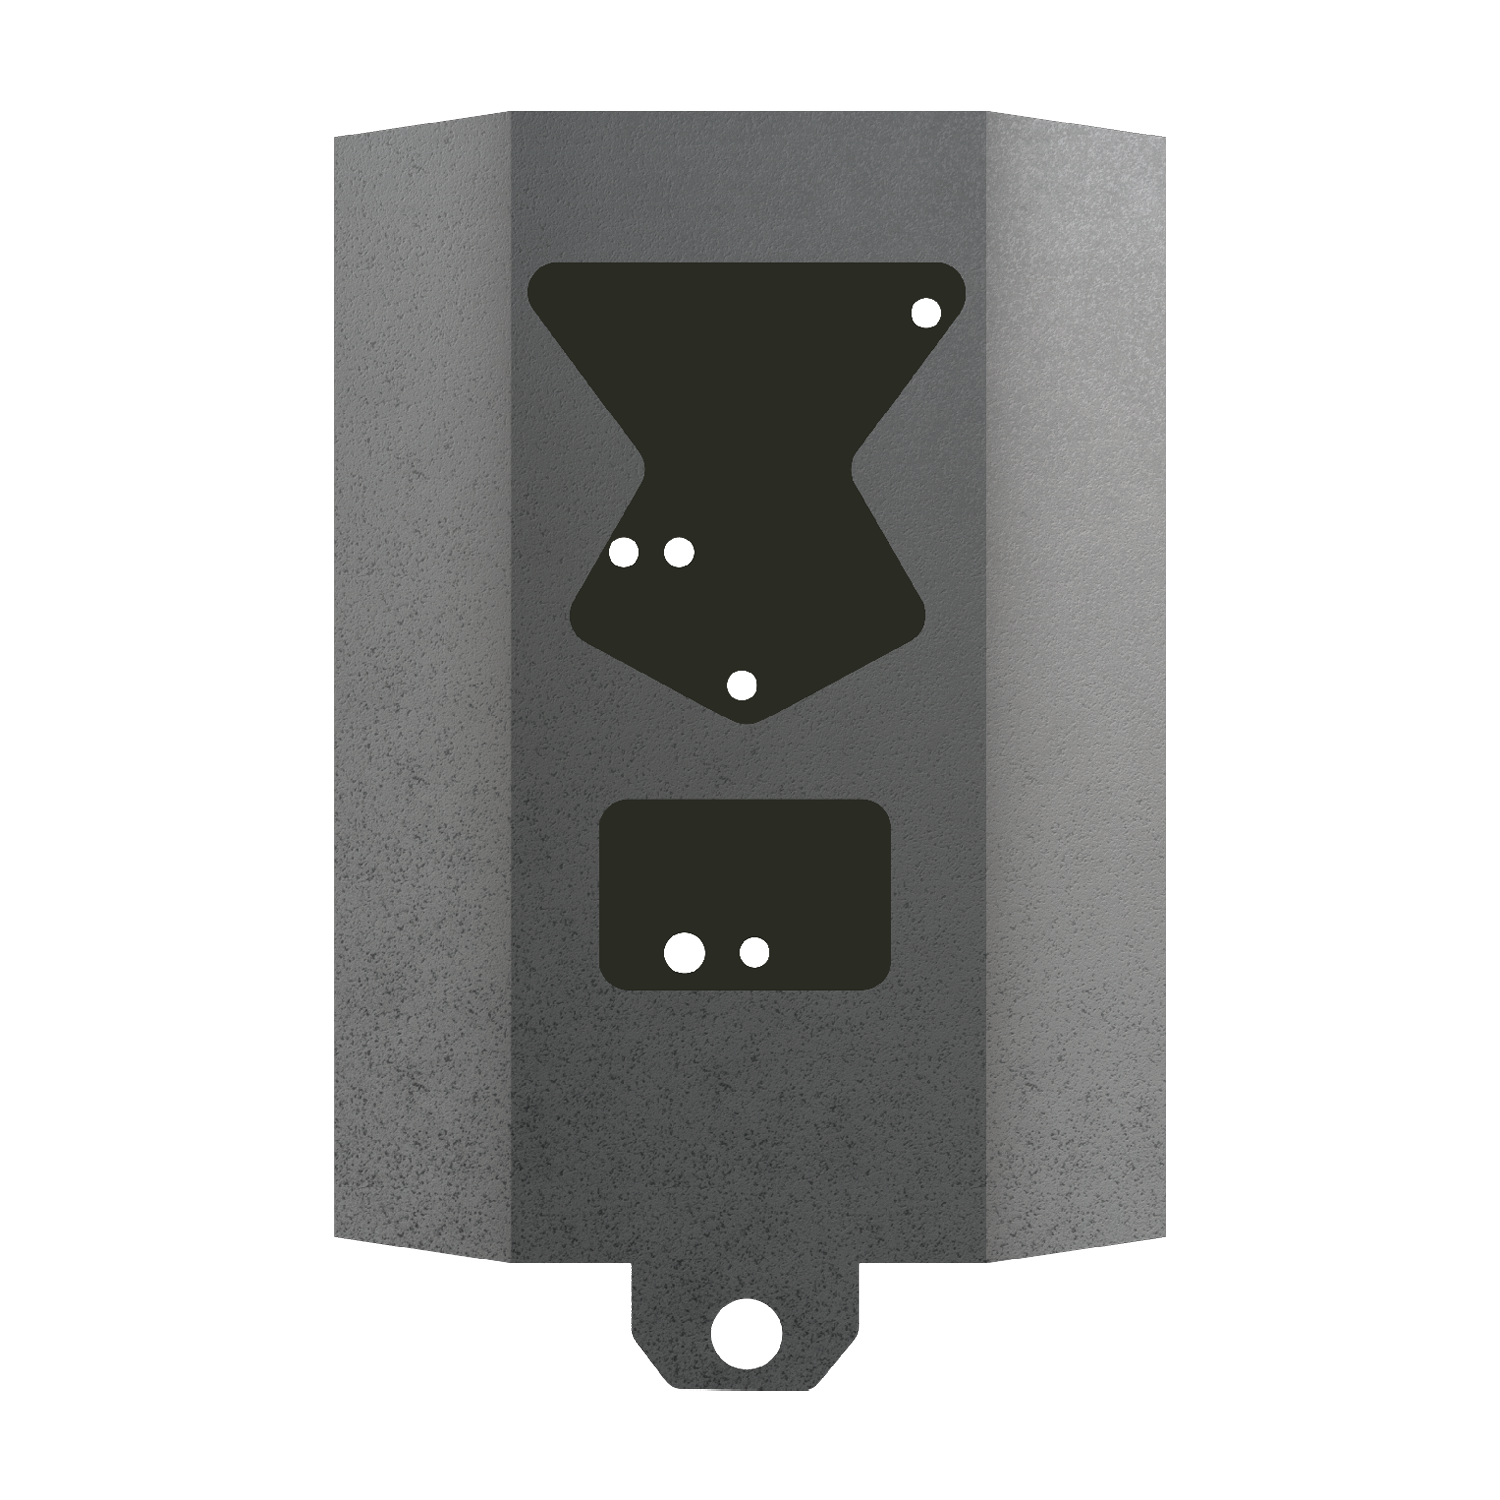 SPYPOINT SB-500 Steel Security Trail Cam Box